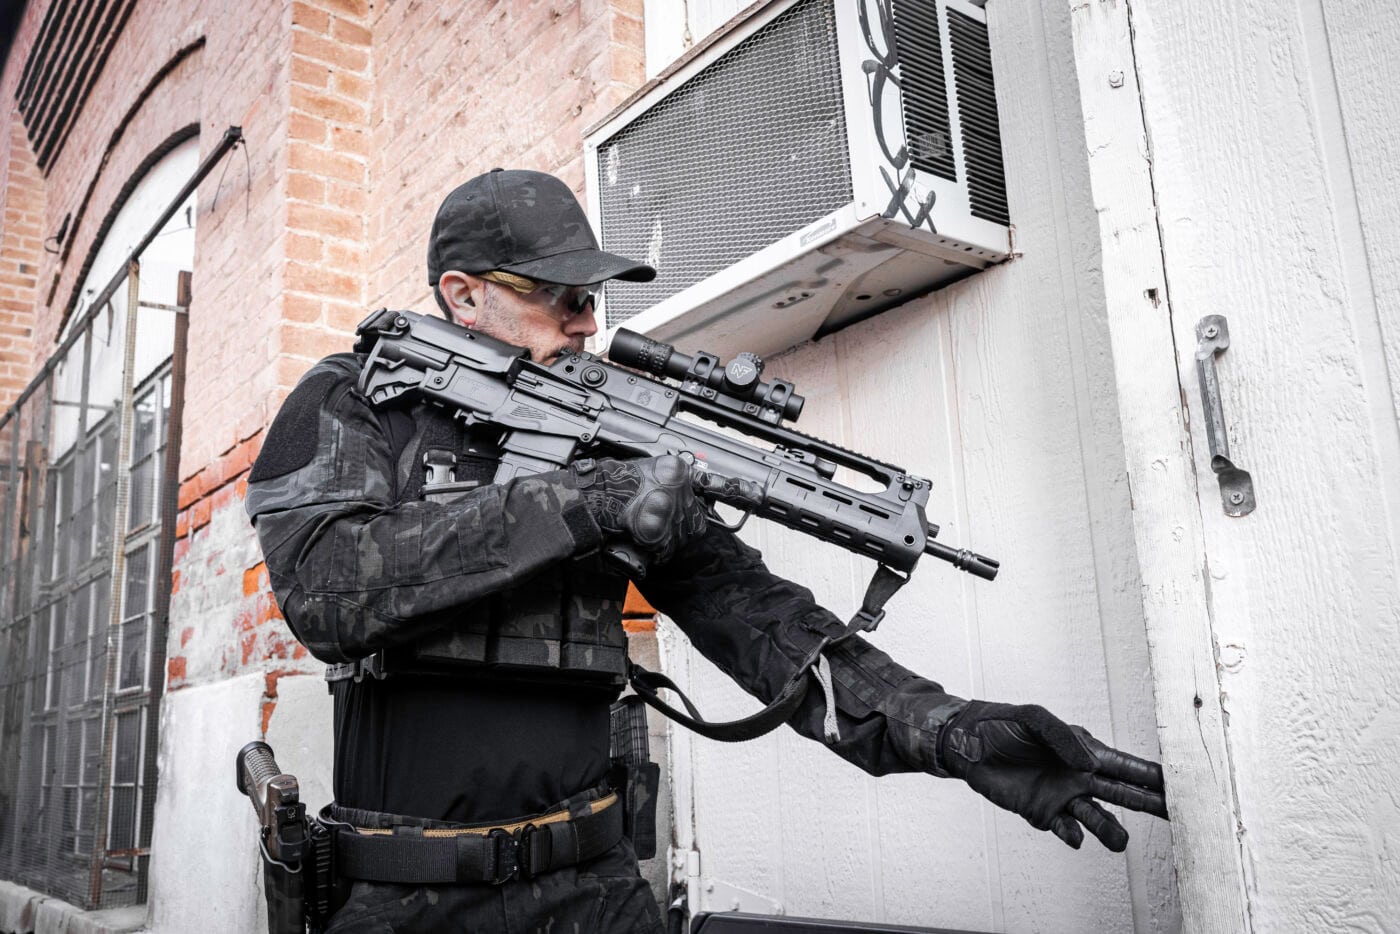 Springfield Hellion rifle being used in SWAT training